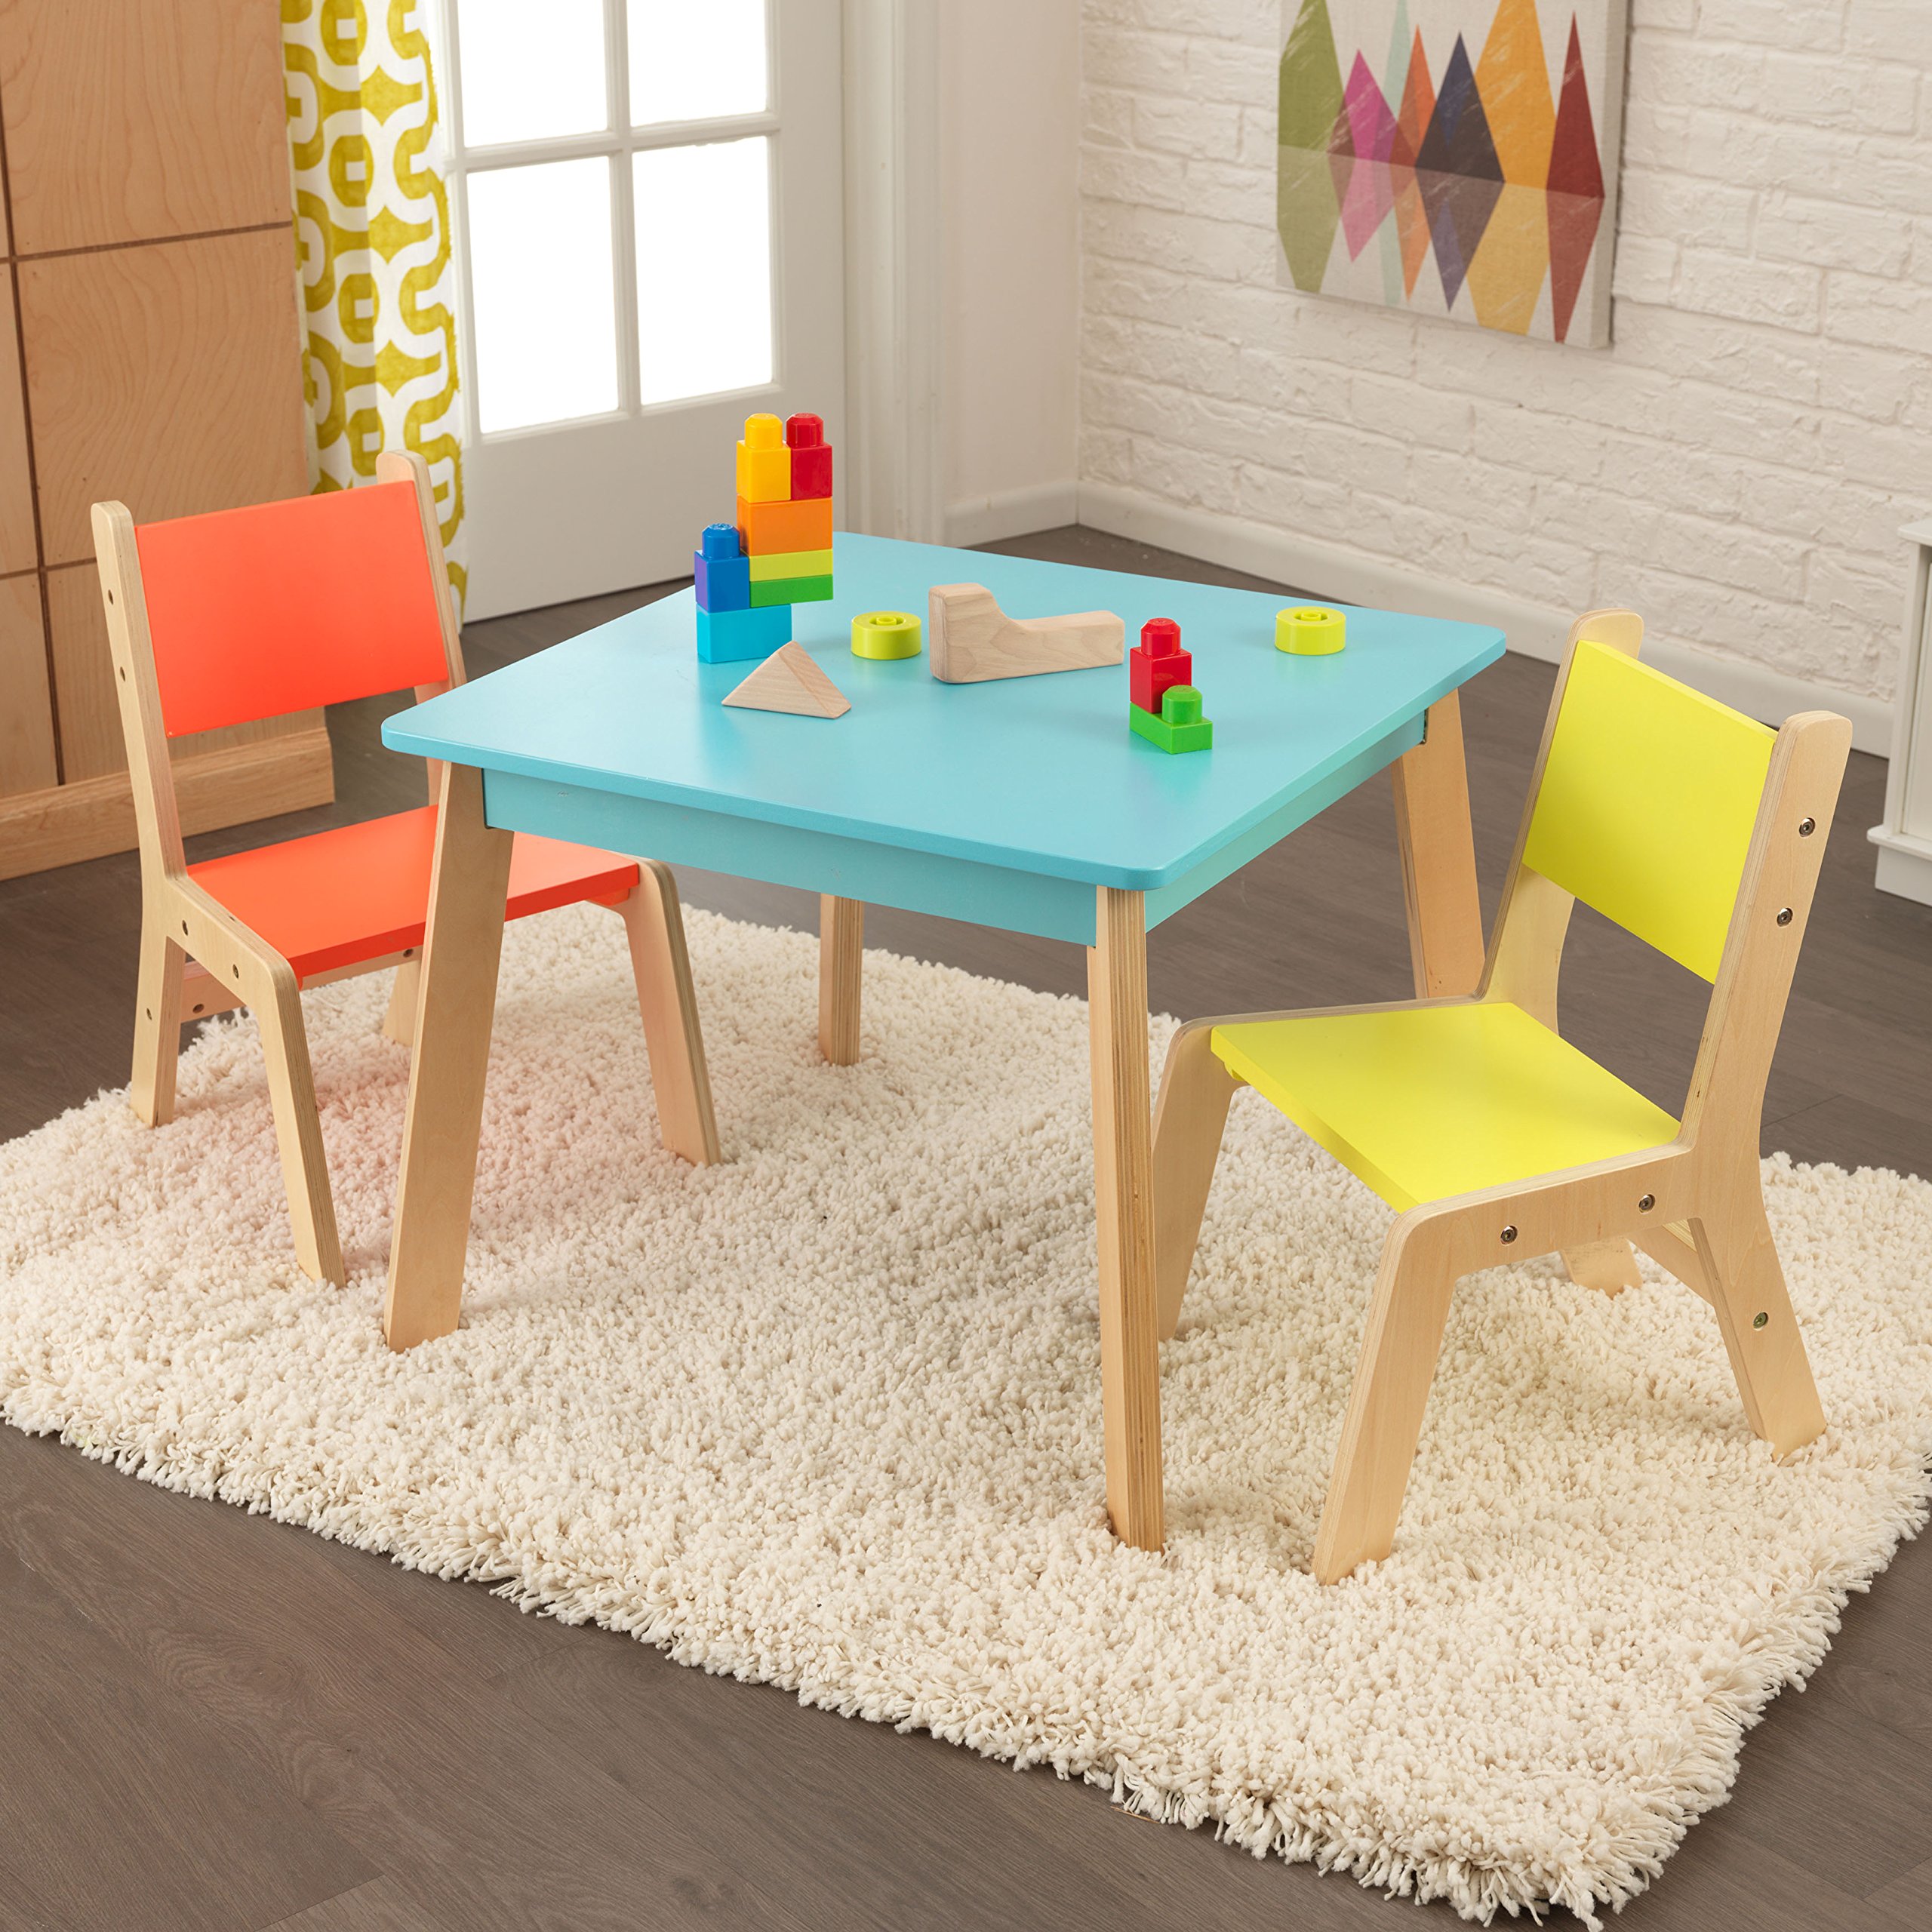 KidKraft Highlighter Children's Modern Table and Chair Set - Bright Colored Wooden Kid's Furniture, Gift for Ages 3-8